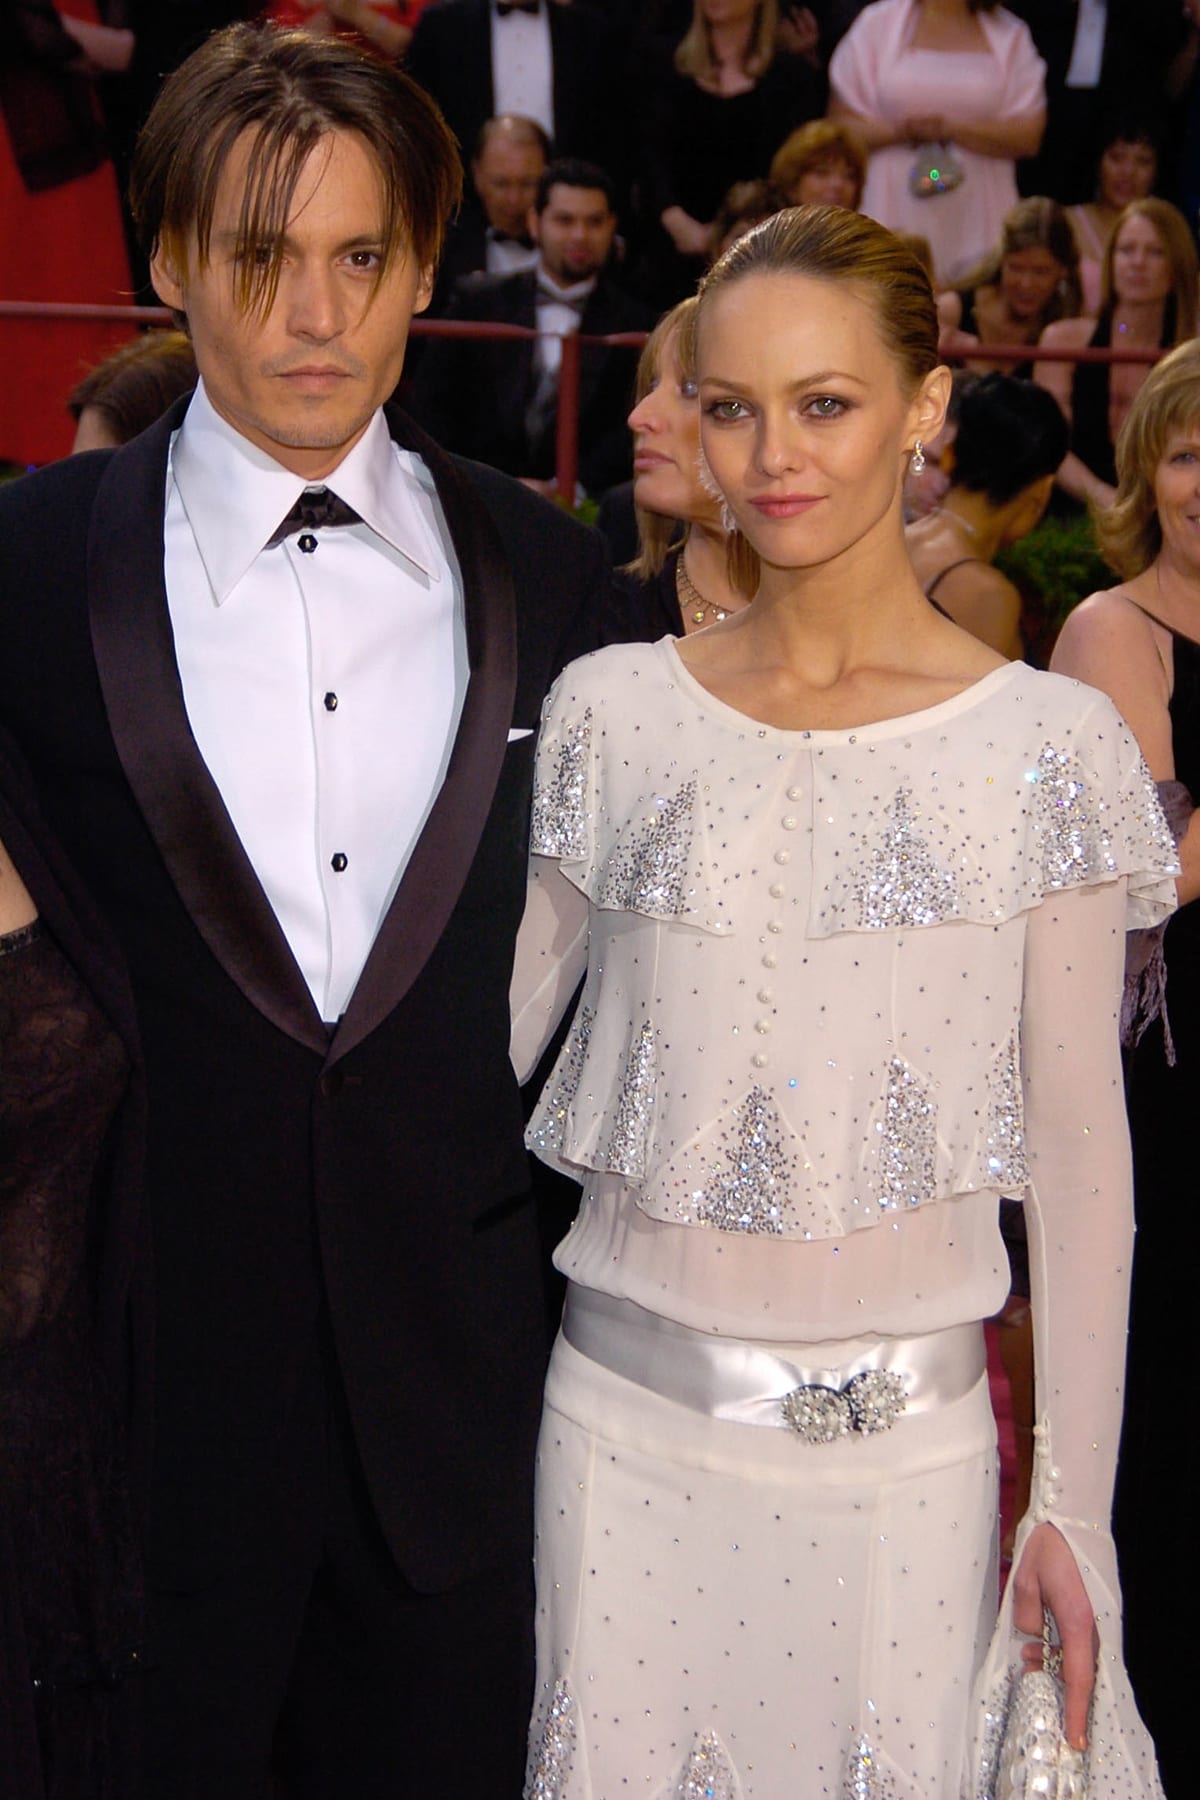 Vanessa Paradis and Johnny Depp met in Paris in 1998 and dated for 14 years until they split in 2012